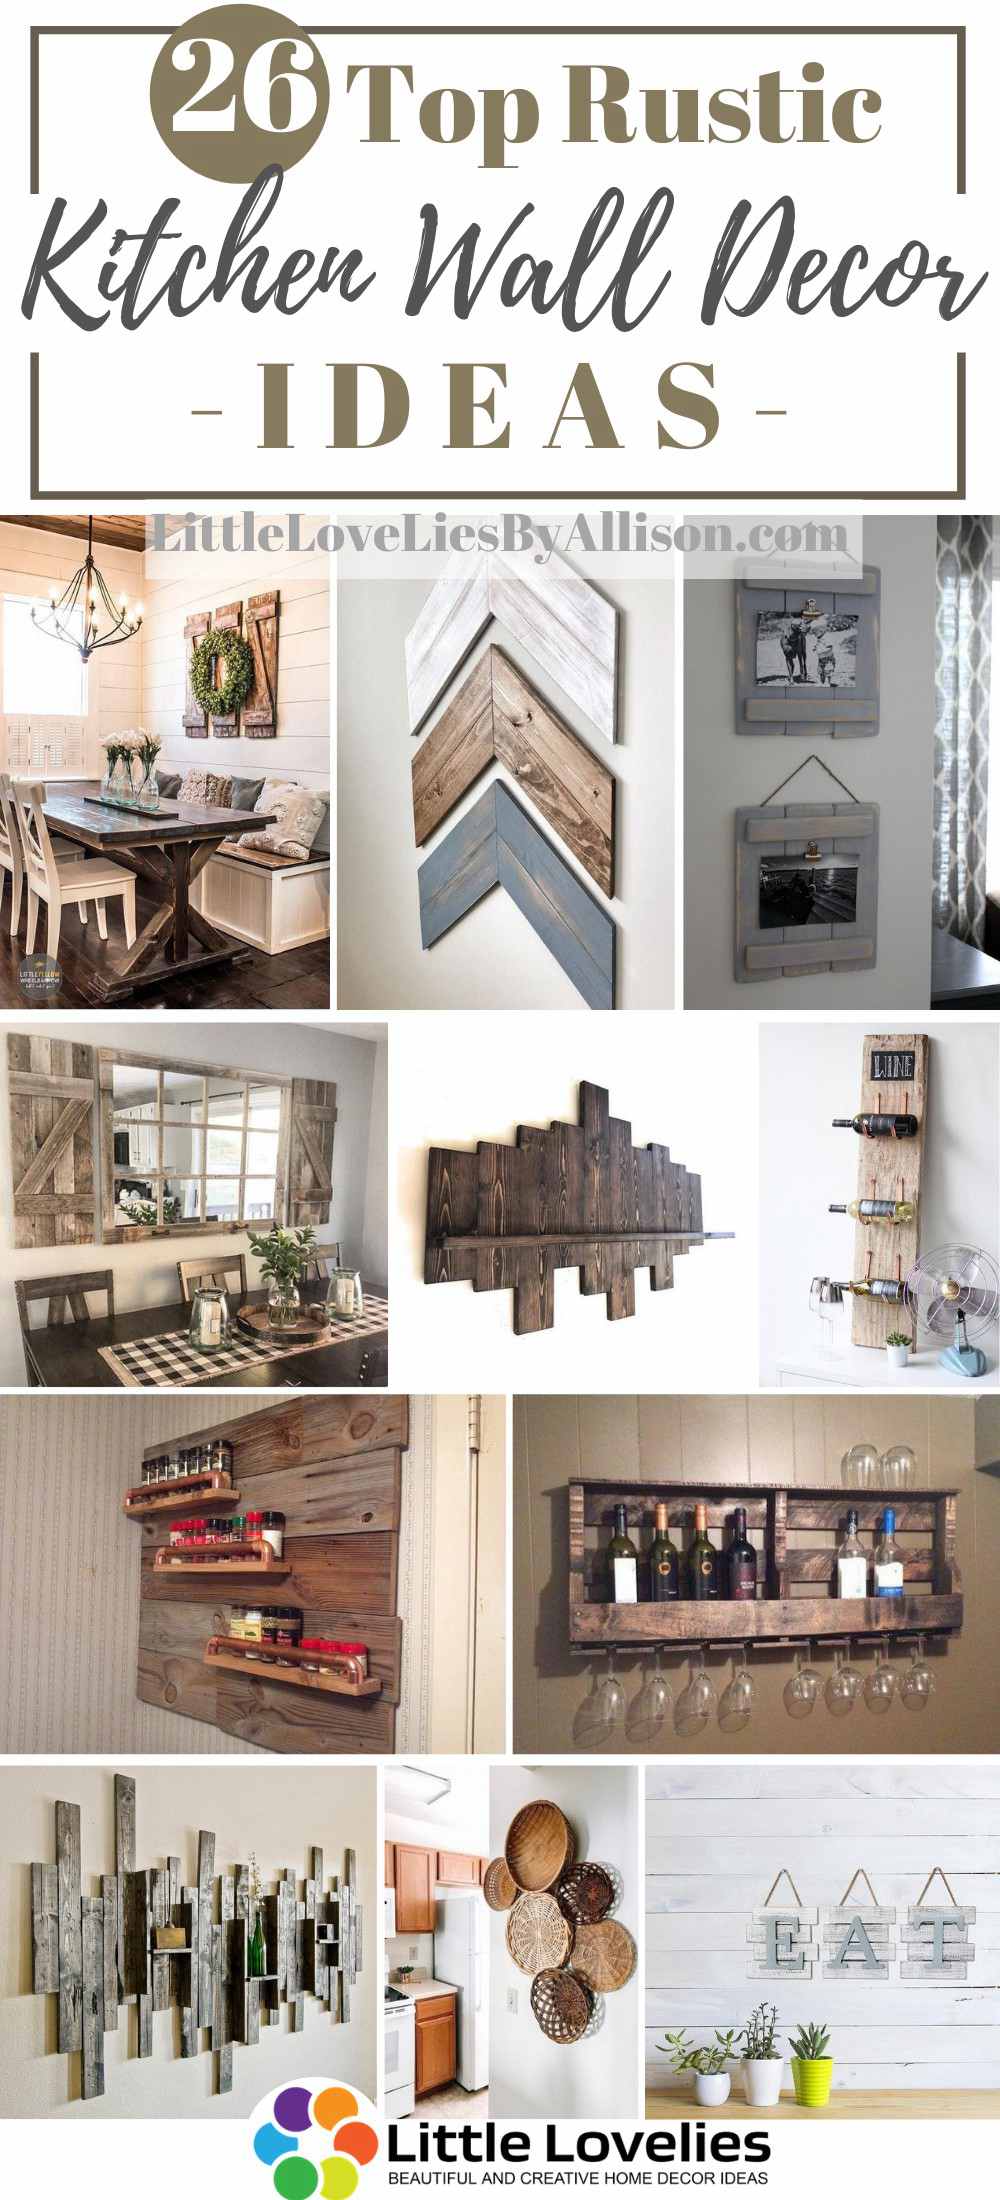 18 Top Rustic Kitchen Wall Decor Ideas That You Can Make in 18